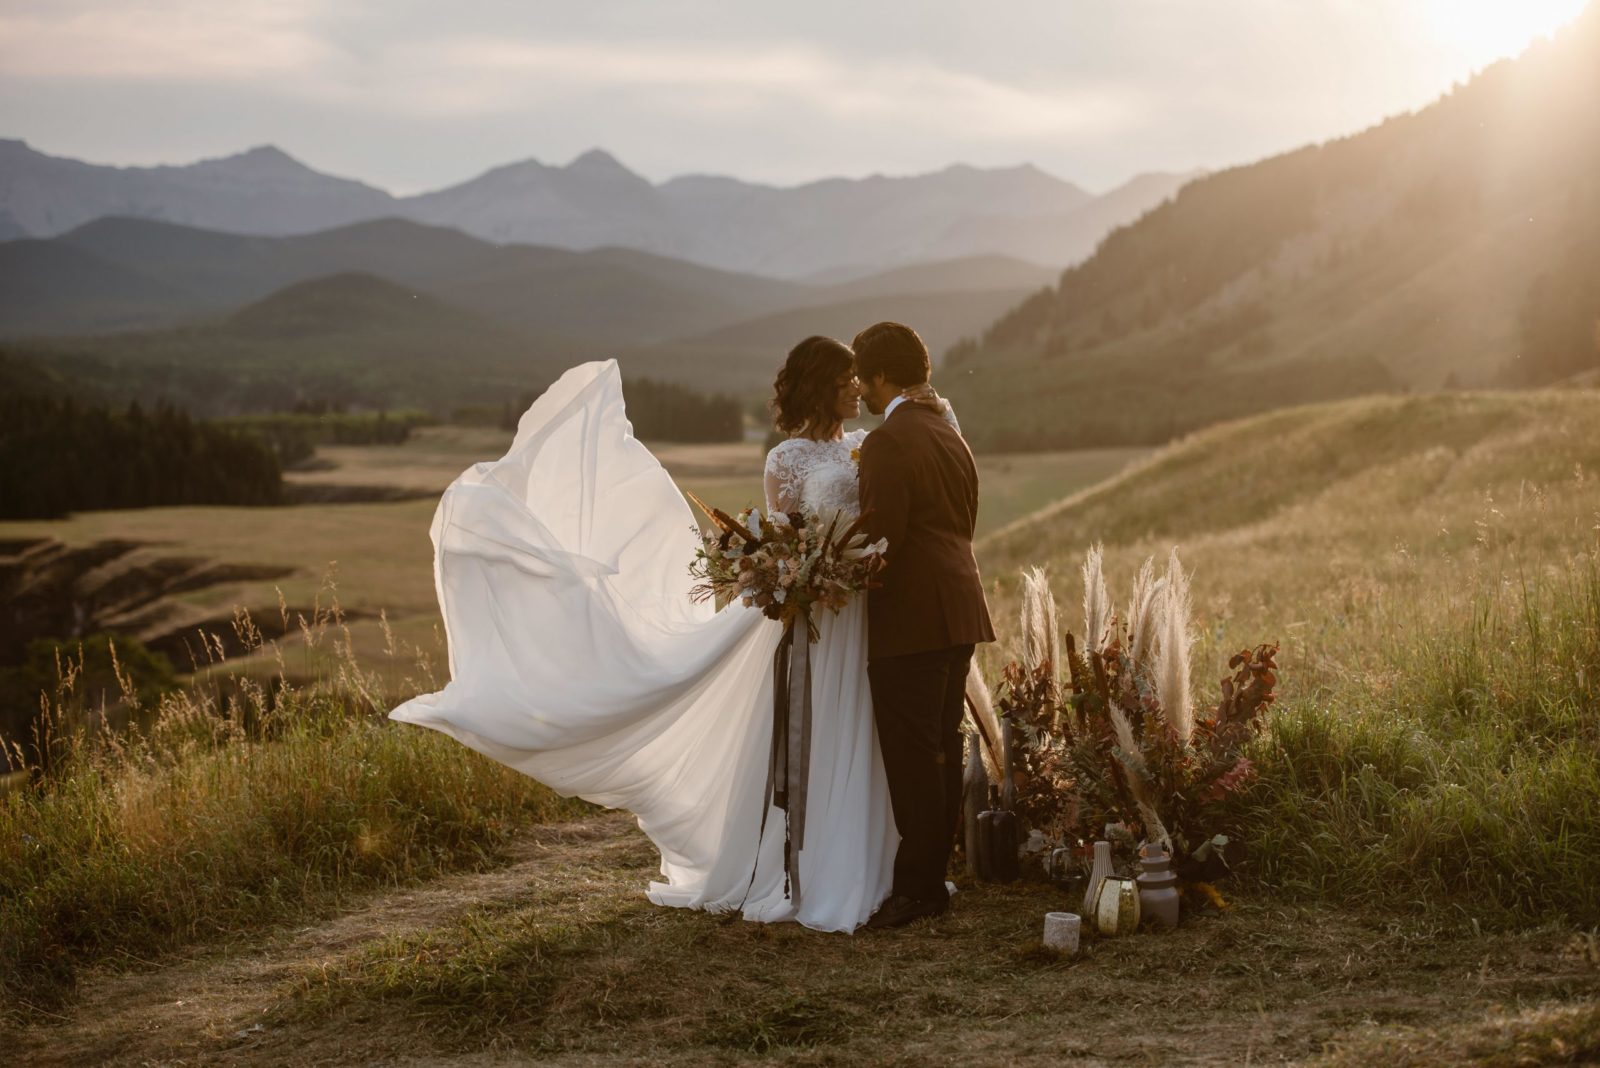 Earthy and Eclectic Moroccan Elopement at Big Horn Lookout featured on Brontë Bride